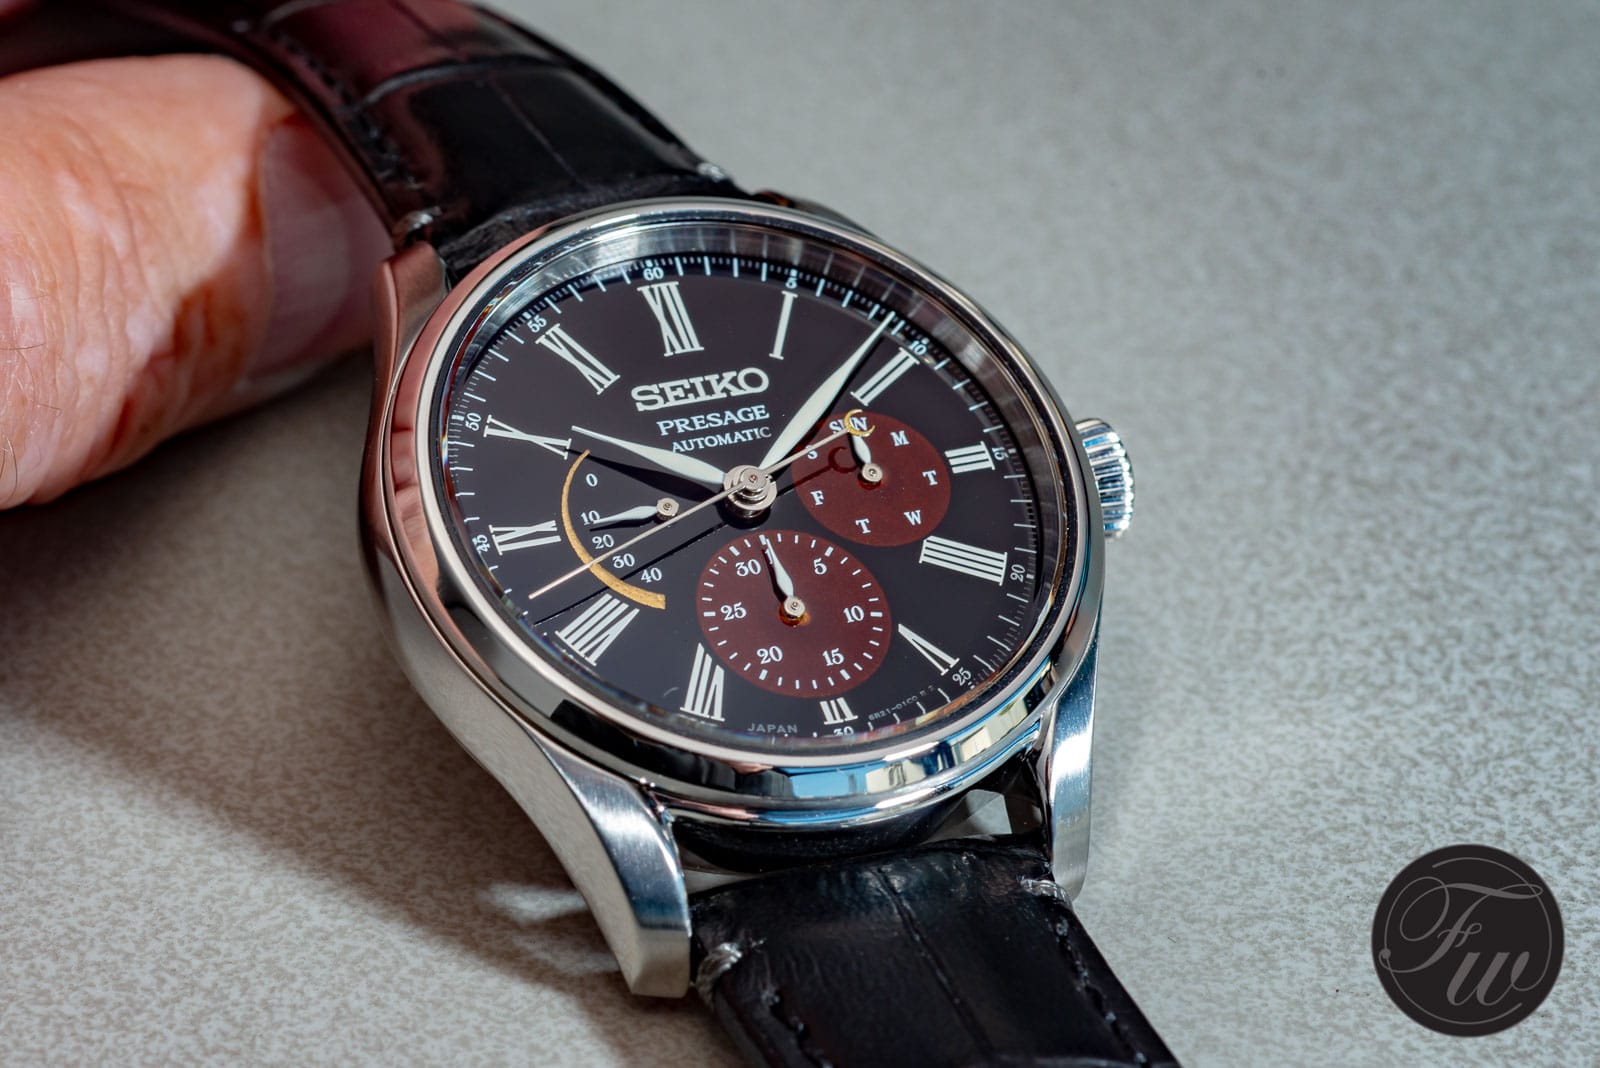 Hands-On With The Seiko Presage Urushi Limited Edition: SPB085